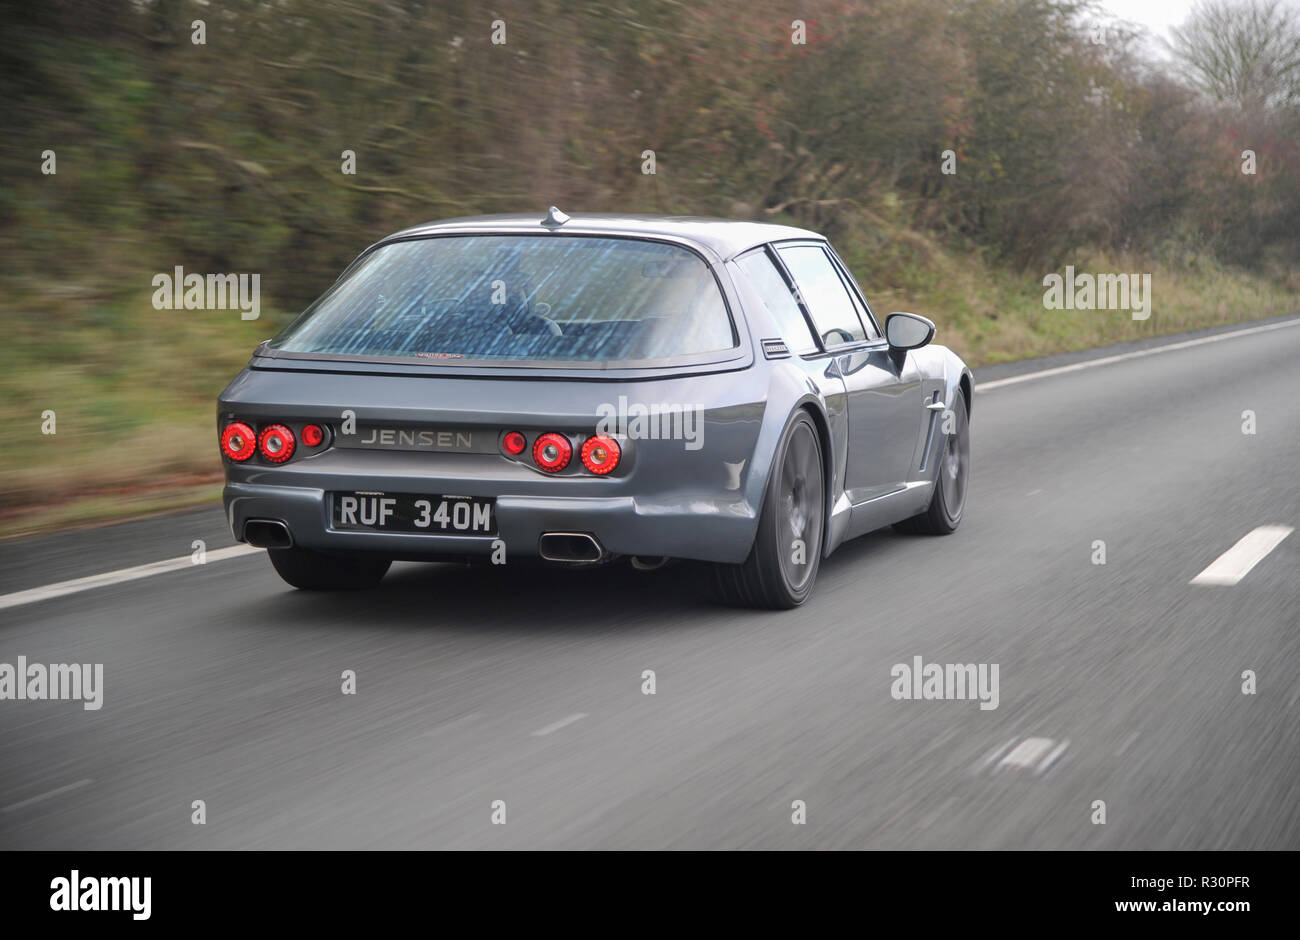 Segrave Jensen Interceptor modified and modernised classic British muscle car with a Viper V10 engine Stock Photo